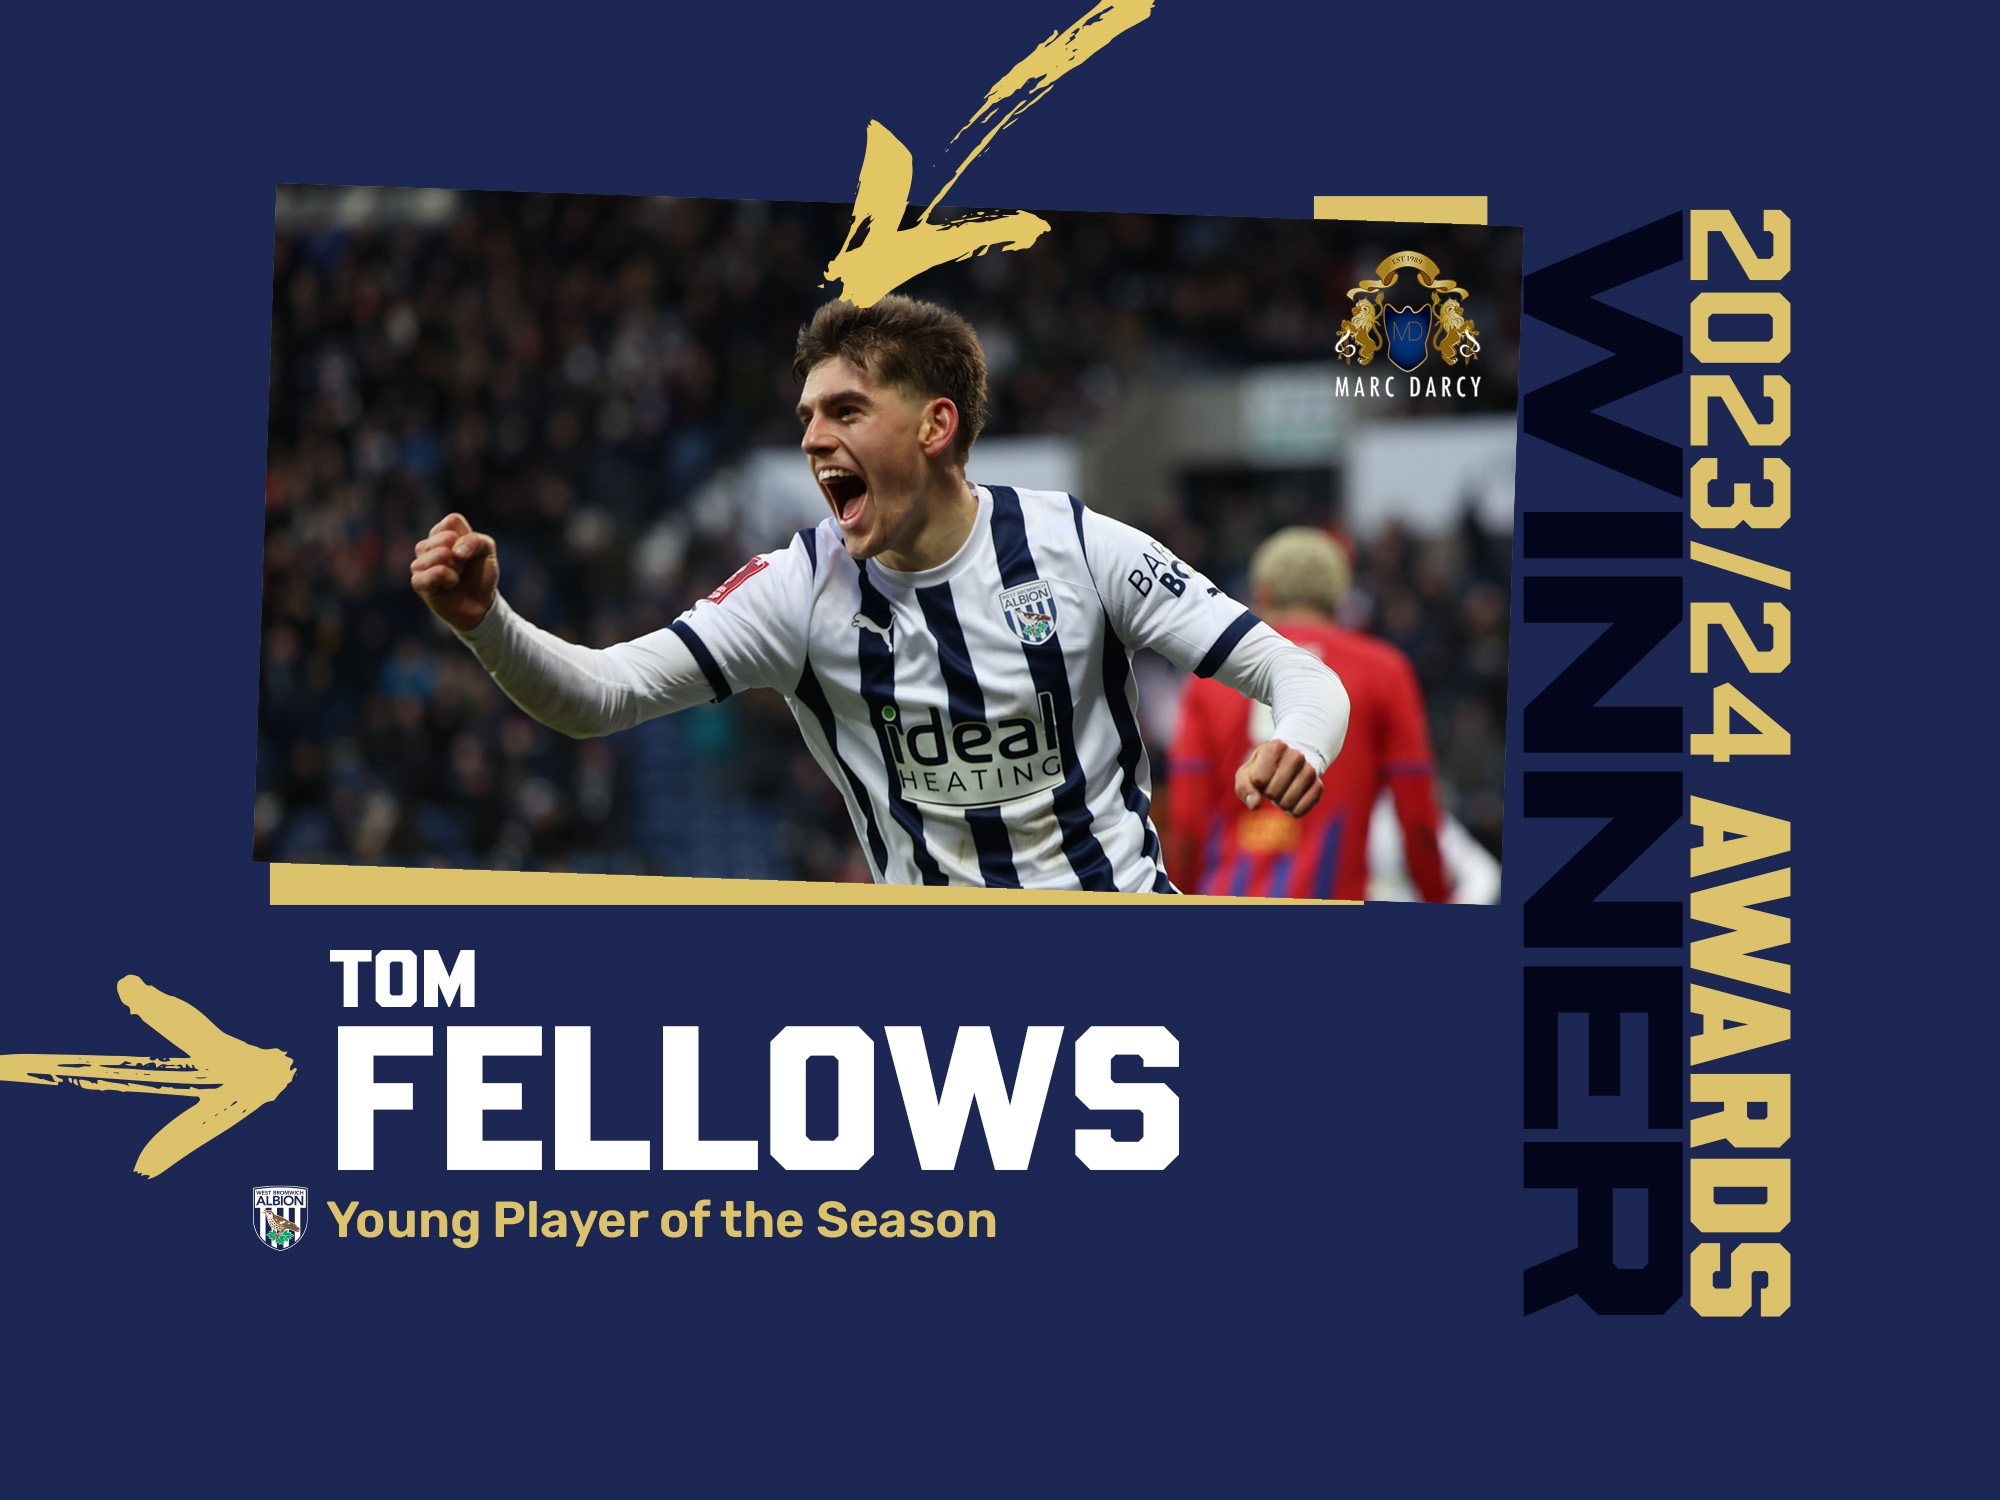 Tom Fellows' Young Player of the Season graphic with an image of him celebrating a goal in the home kit on